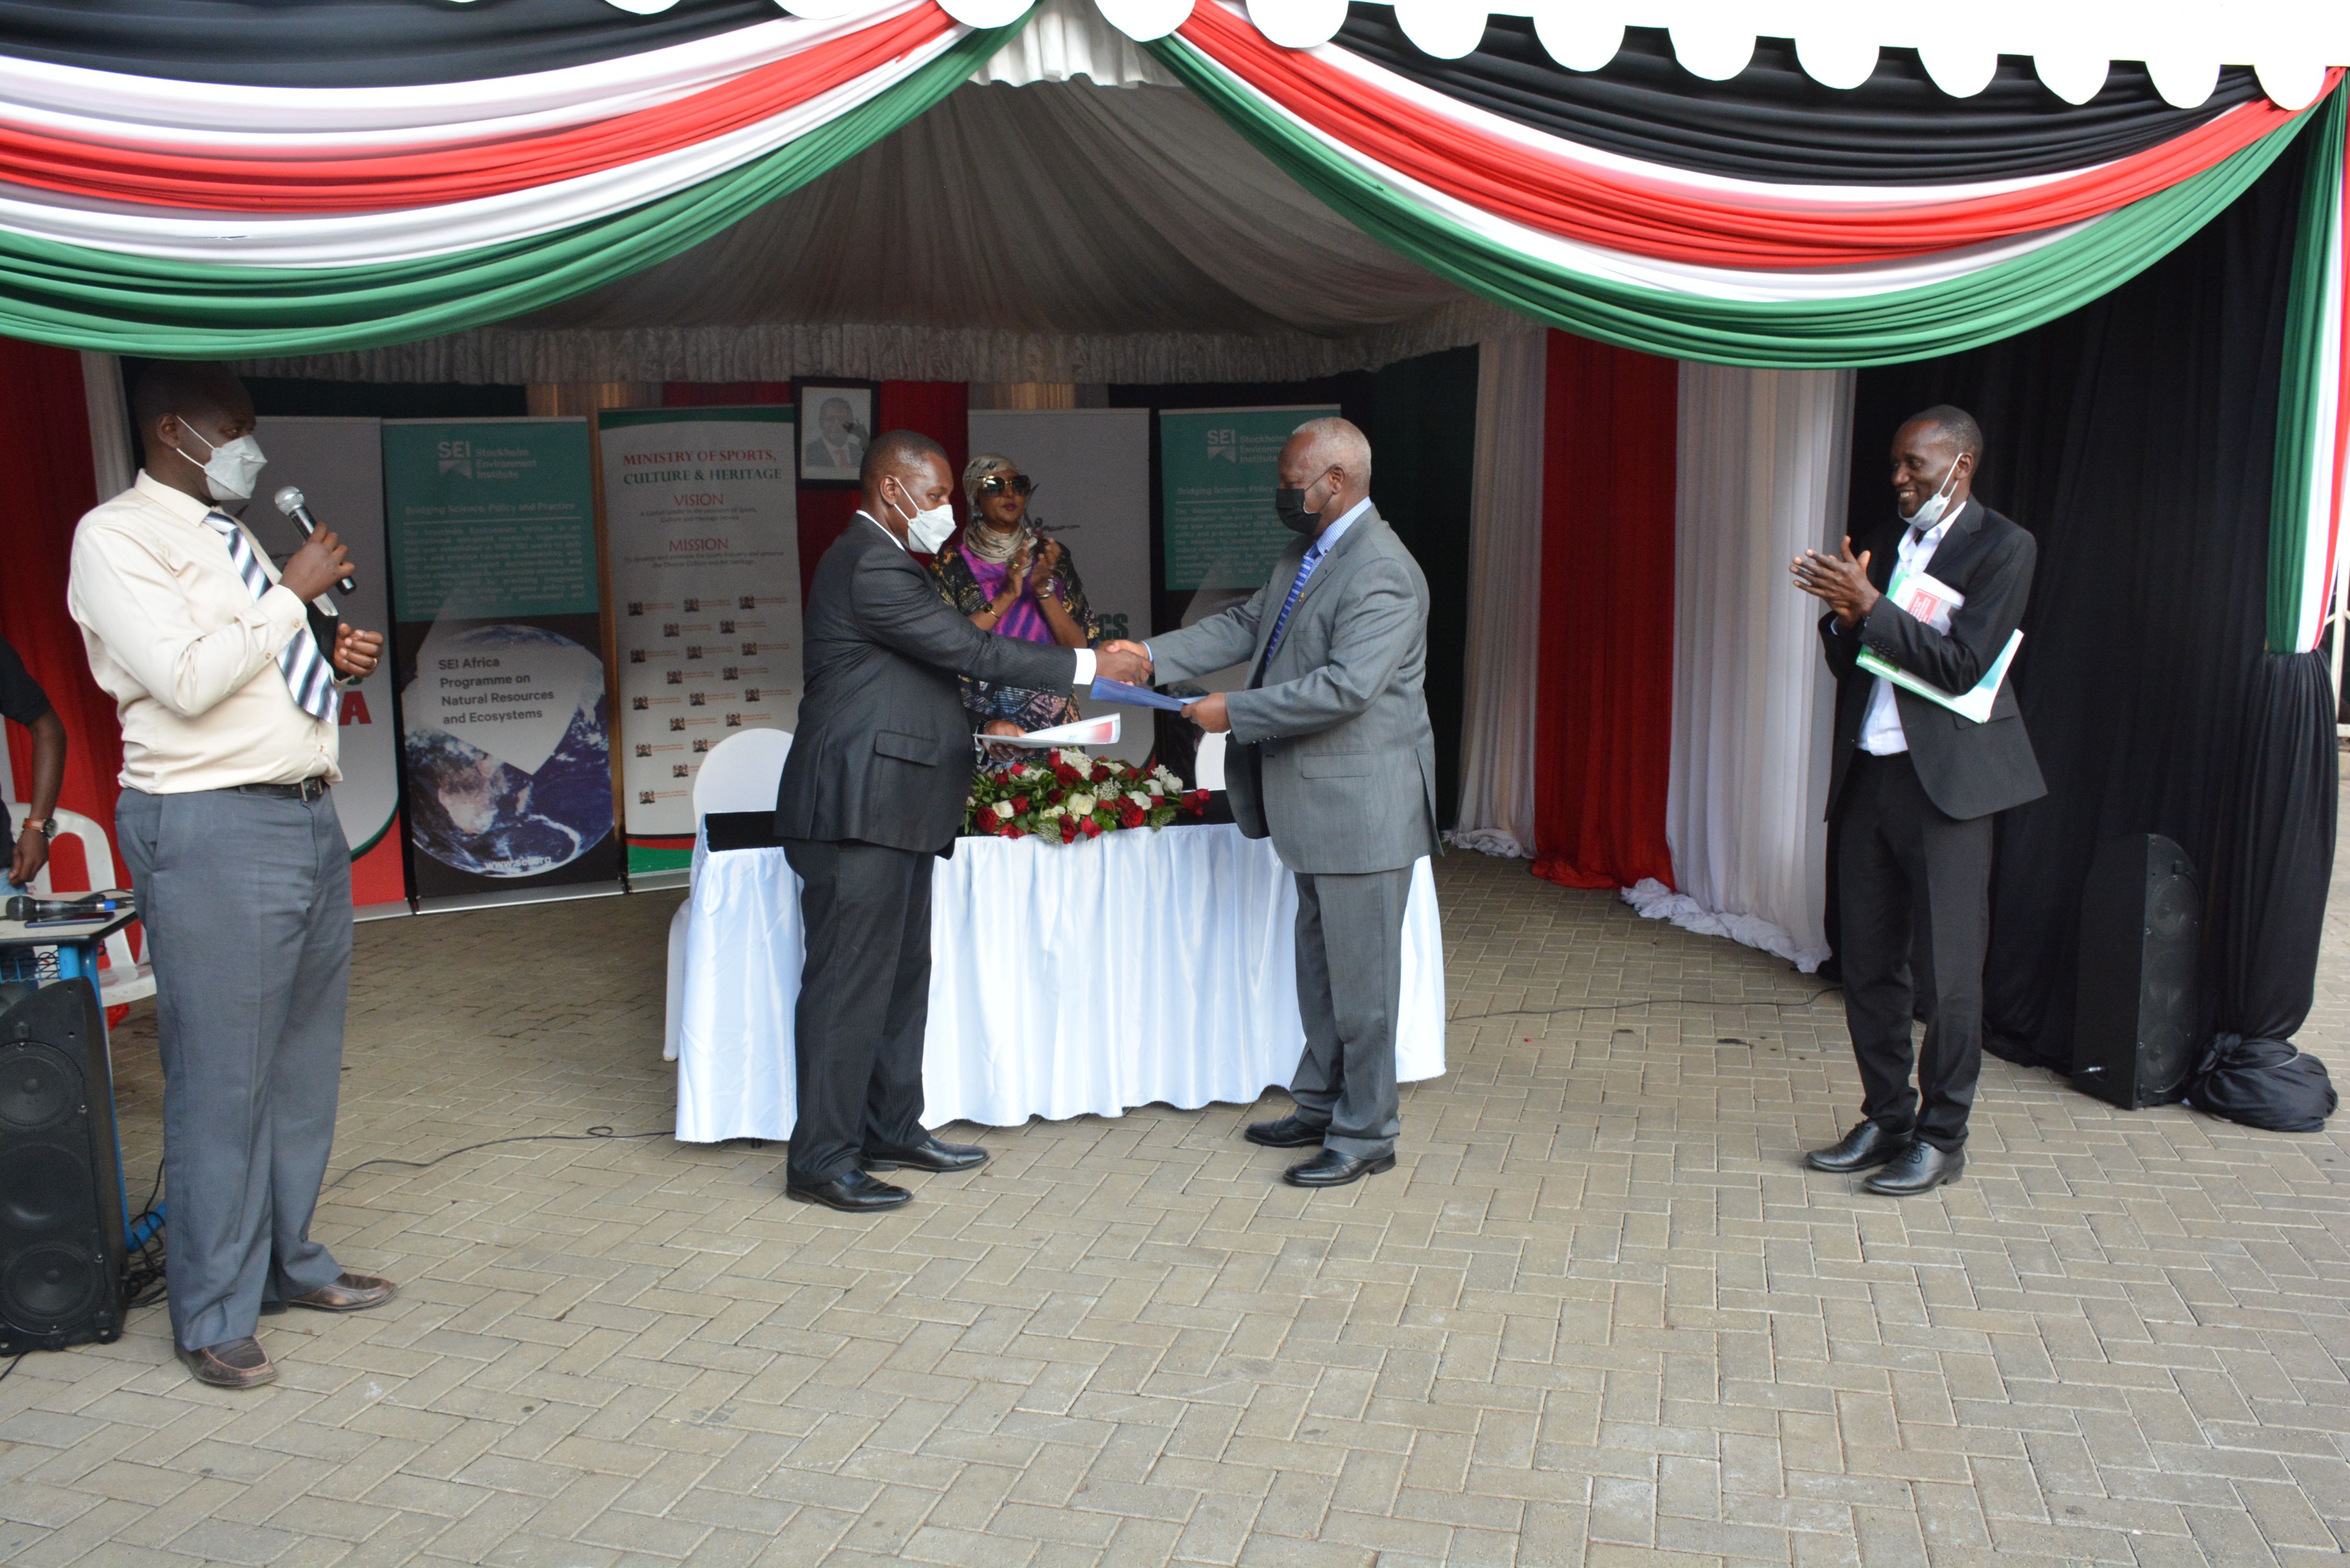 A function is held to mark new sensors at the Nyayo Stadium and the signing of an MoU with the SEI